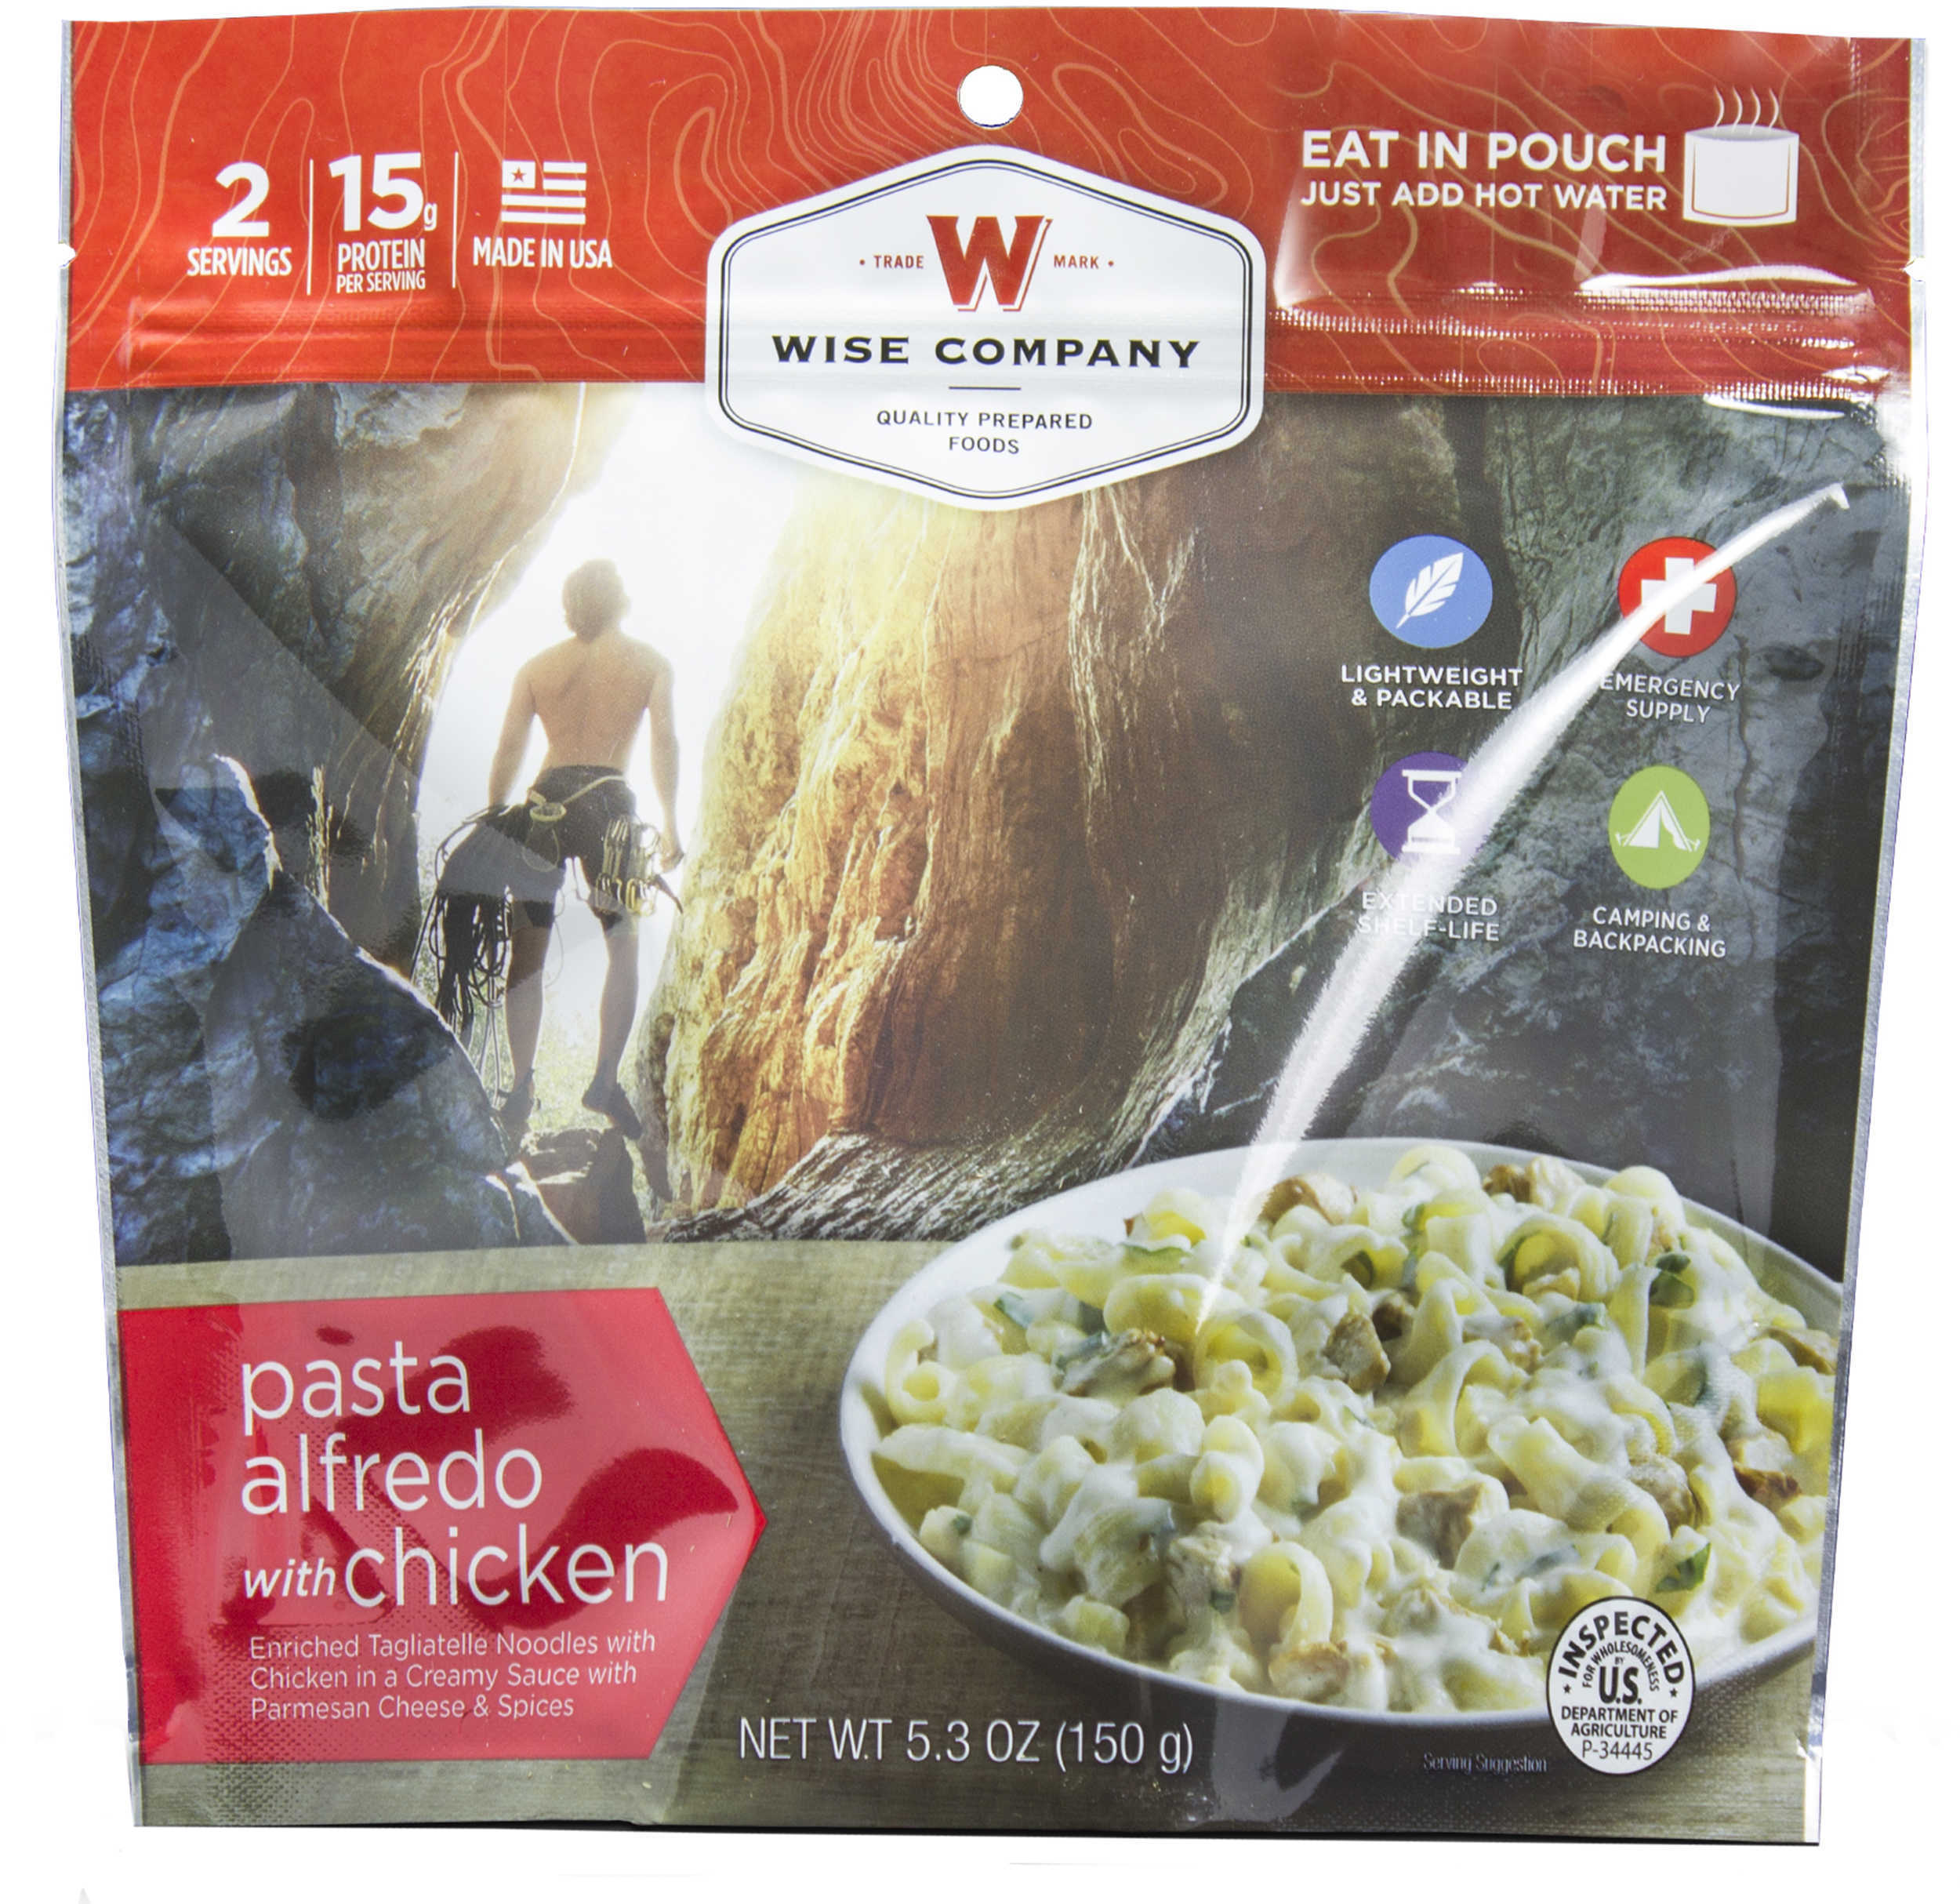 Wise Foods EntréE Dish Pasta Alfredo With Chicken, 2 Servings Md: 03-902